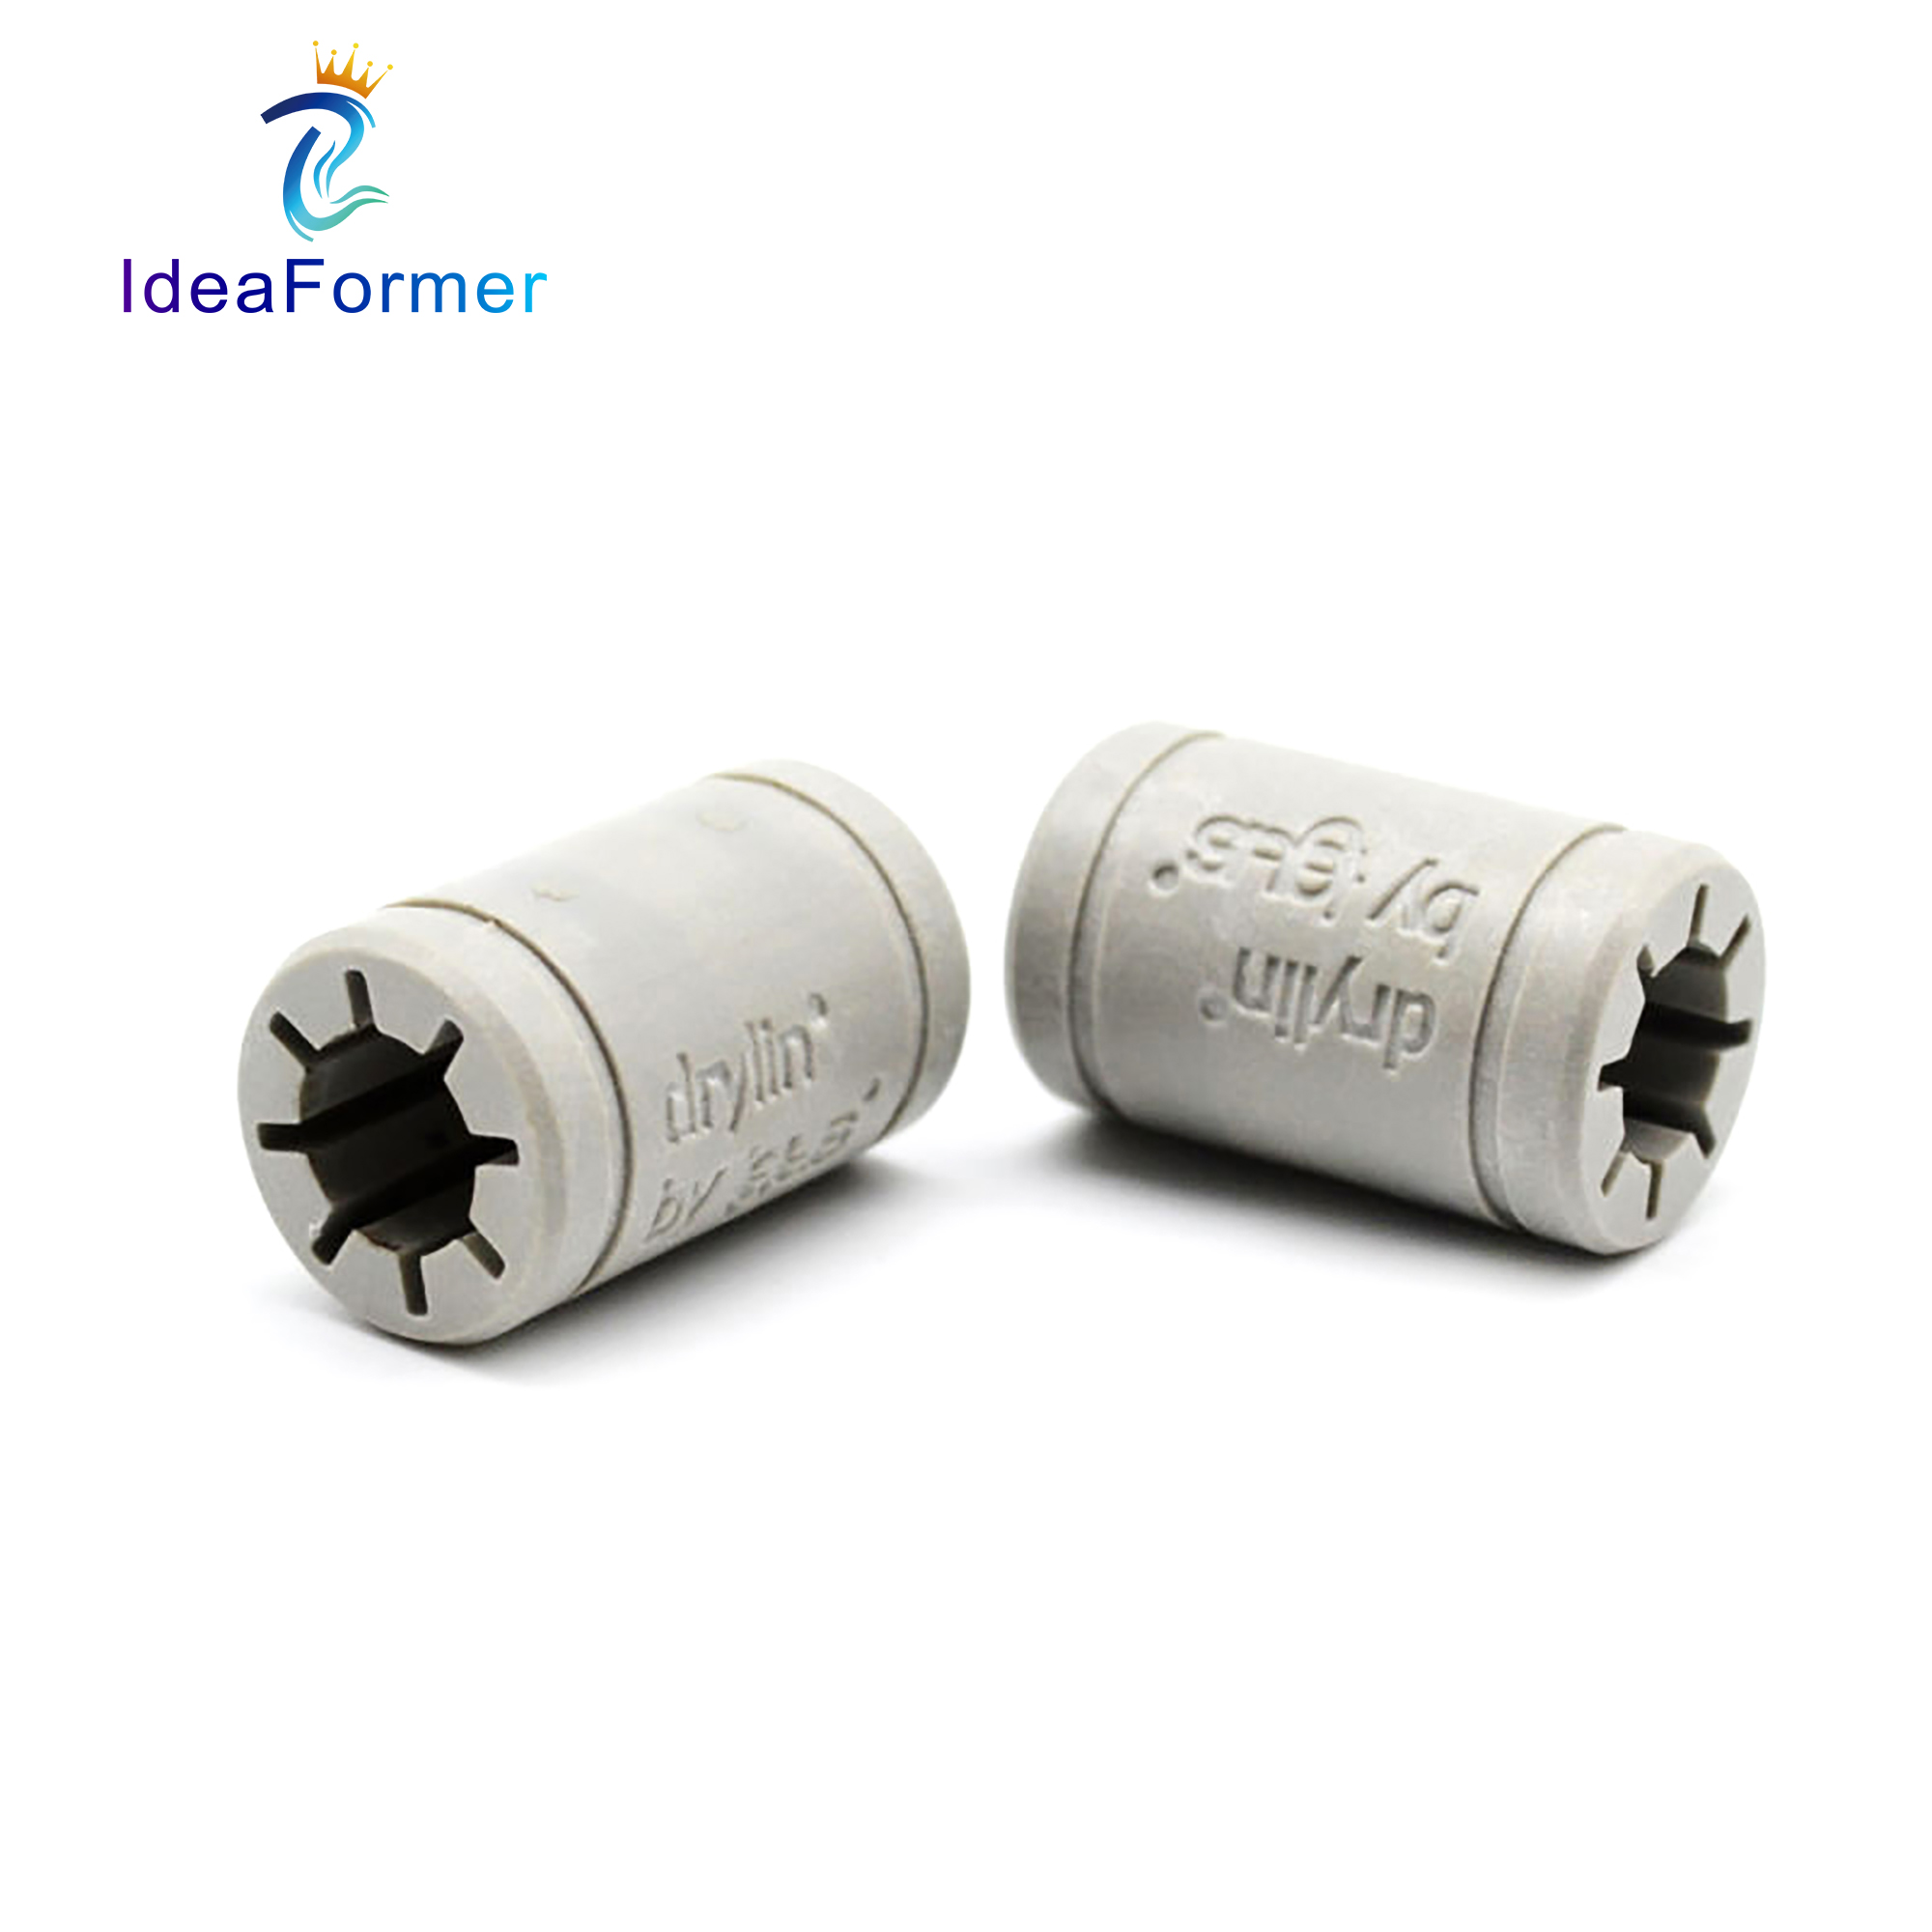 Genuine drylin by igus RJ4JP01 Non-counterfeit 10mm LM10UU linear bearing For Reprap Anet A8 Prusa I3 3D Printer CNC Shaft Parts